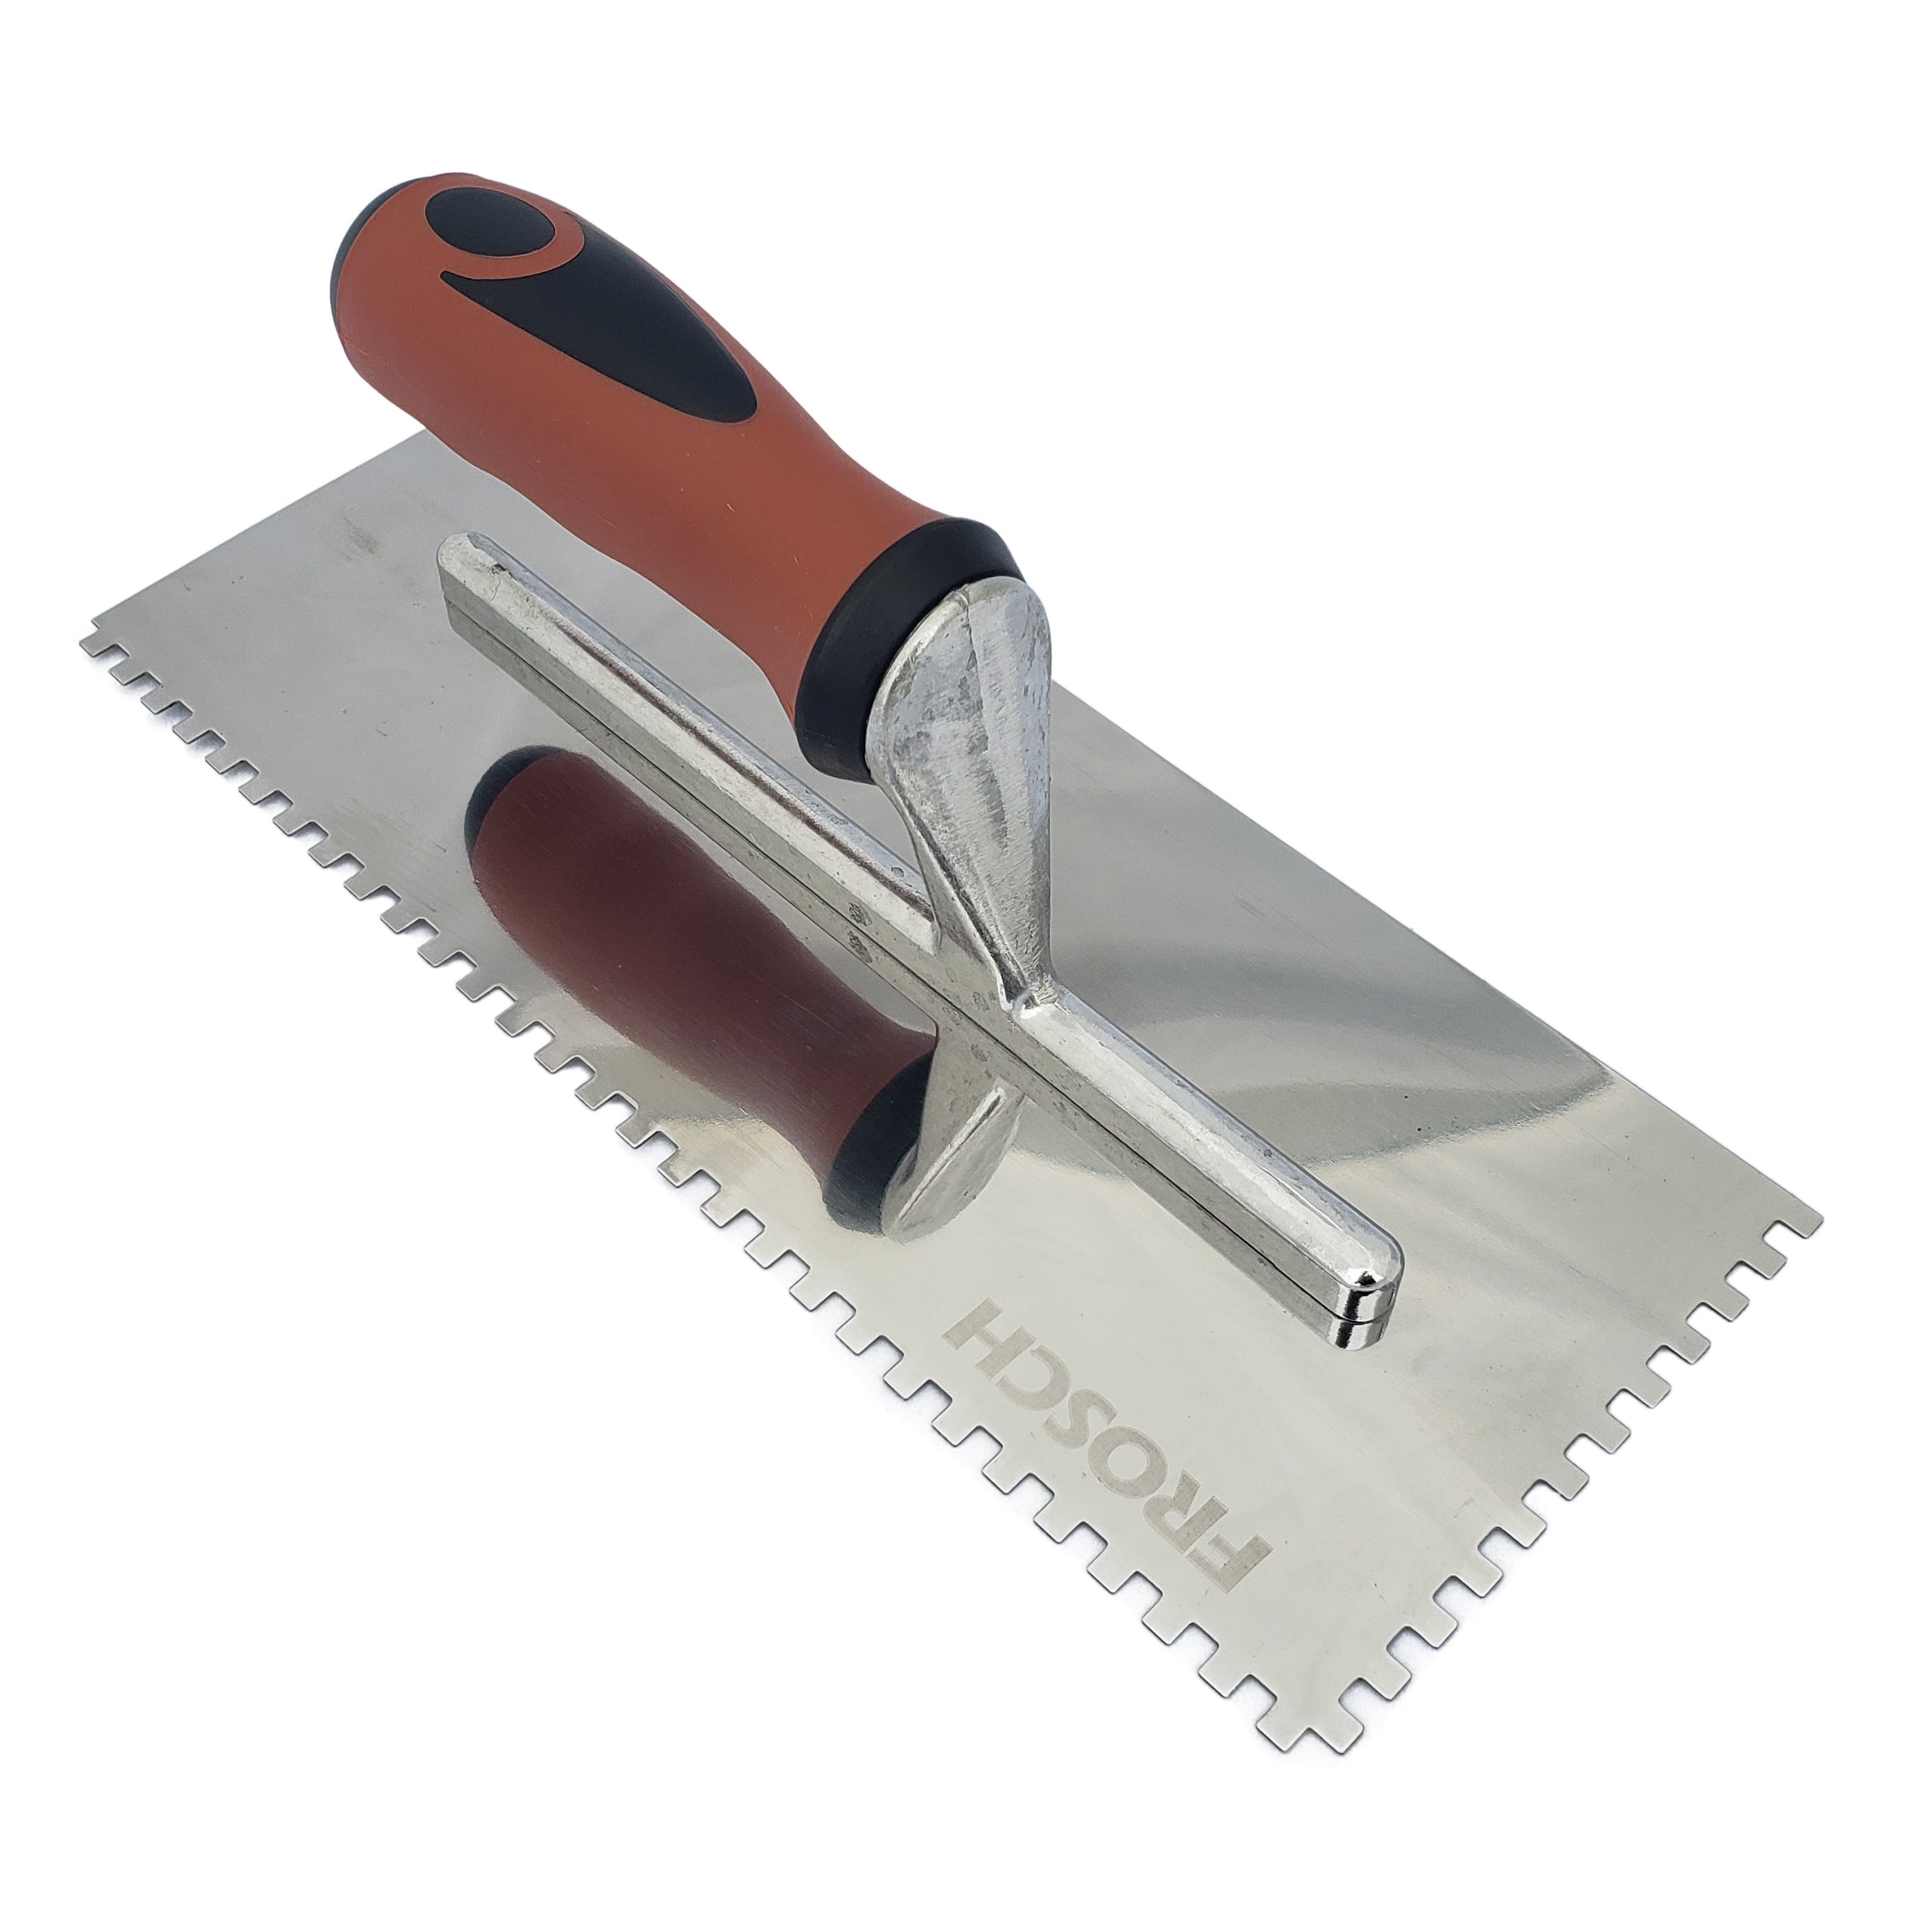 Stainless Steel Square Notch Trowel - 3/16" X 3/16"